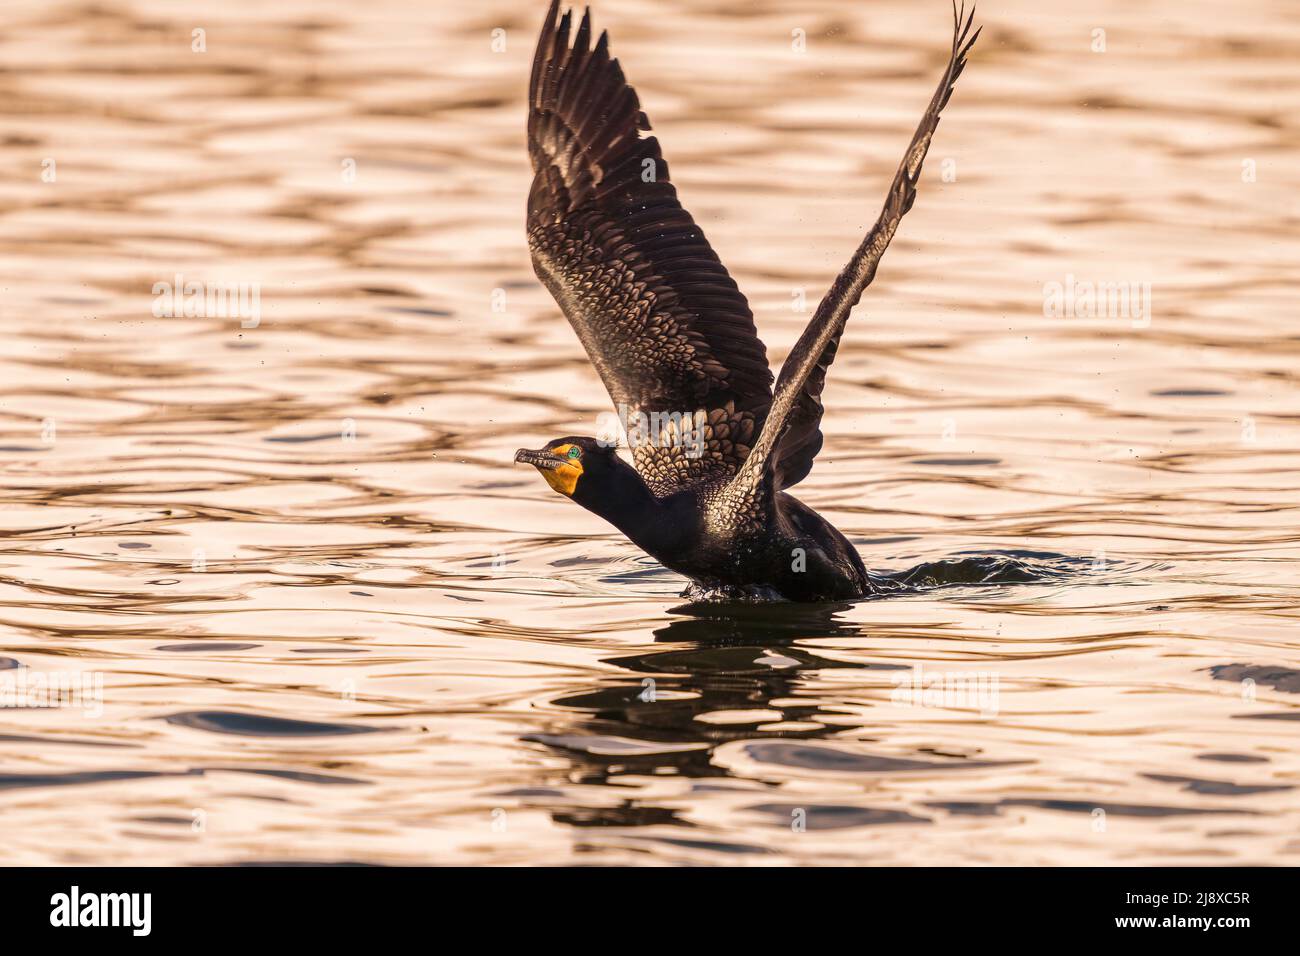 A Double-crested Cormorant rising up out of the water with extended wings is ready for flight. Stock Photo